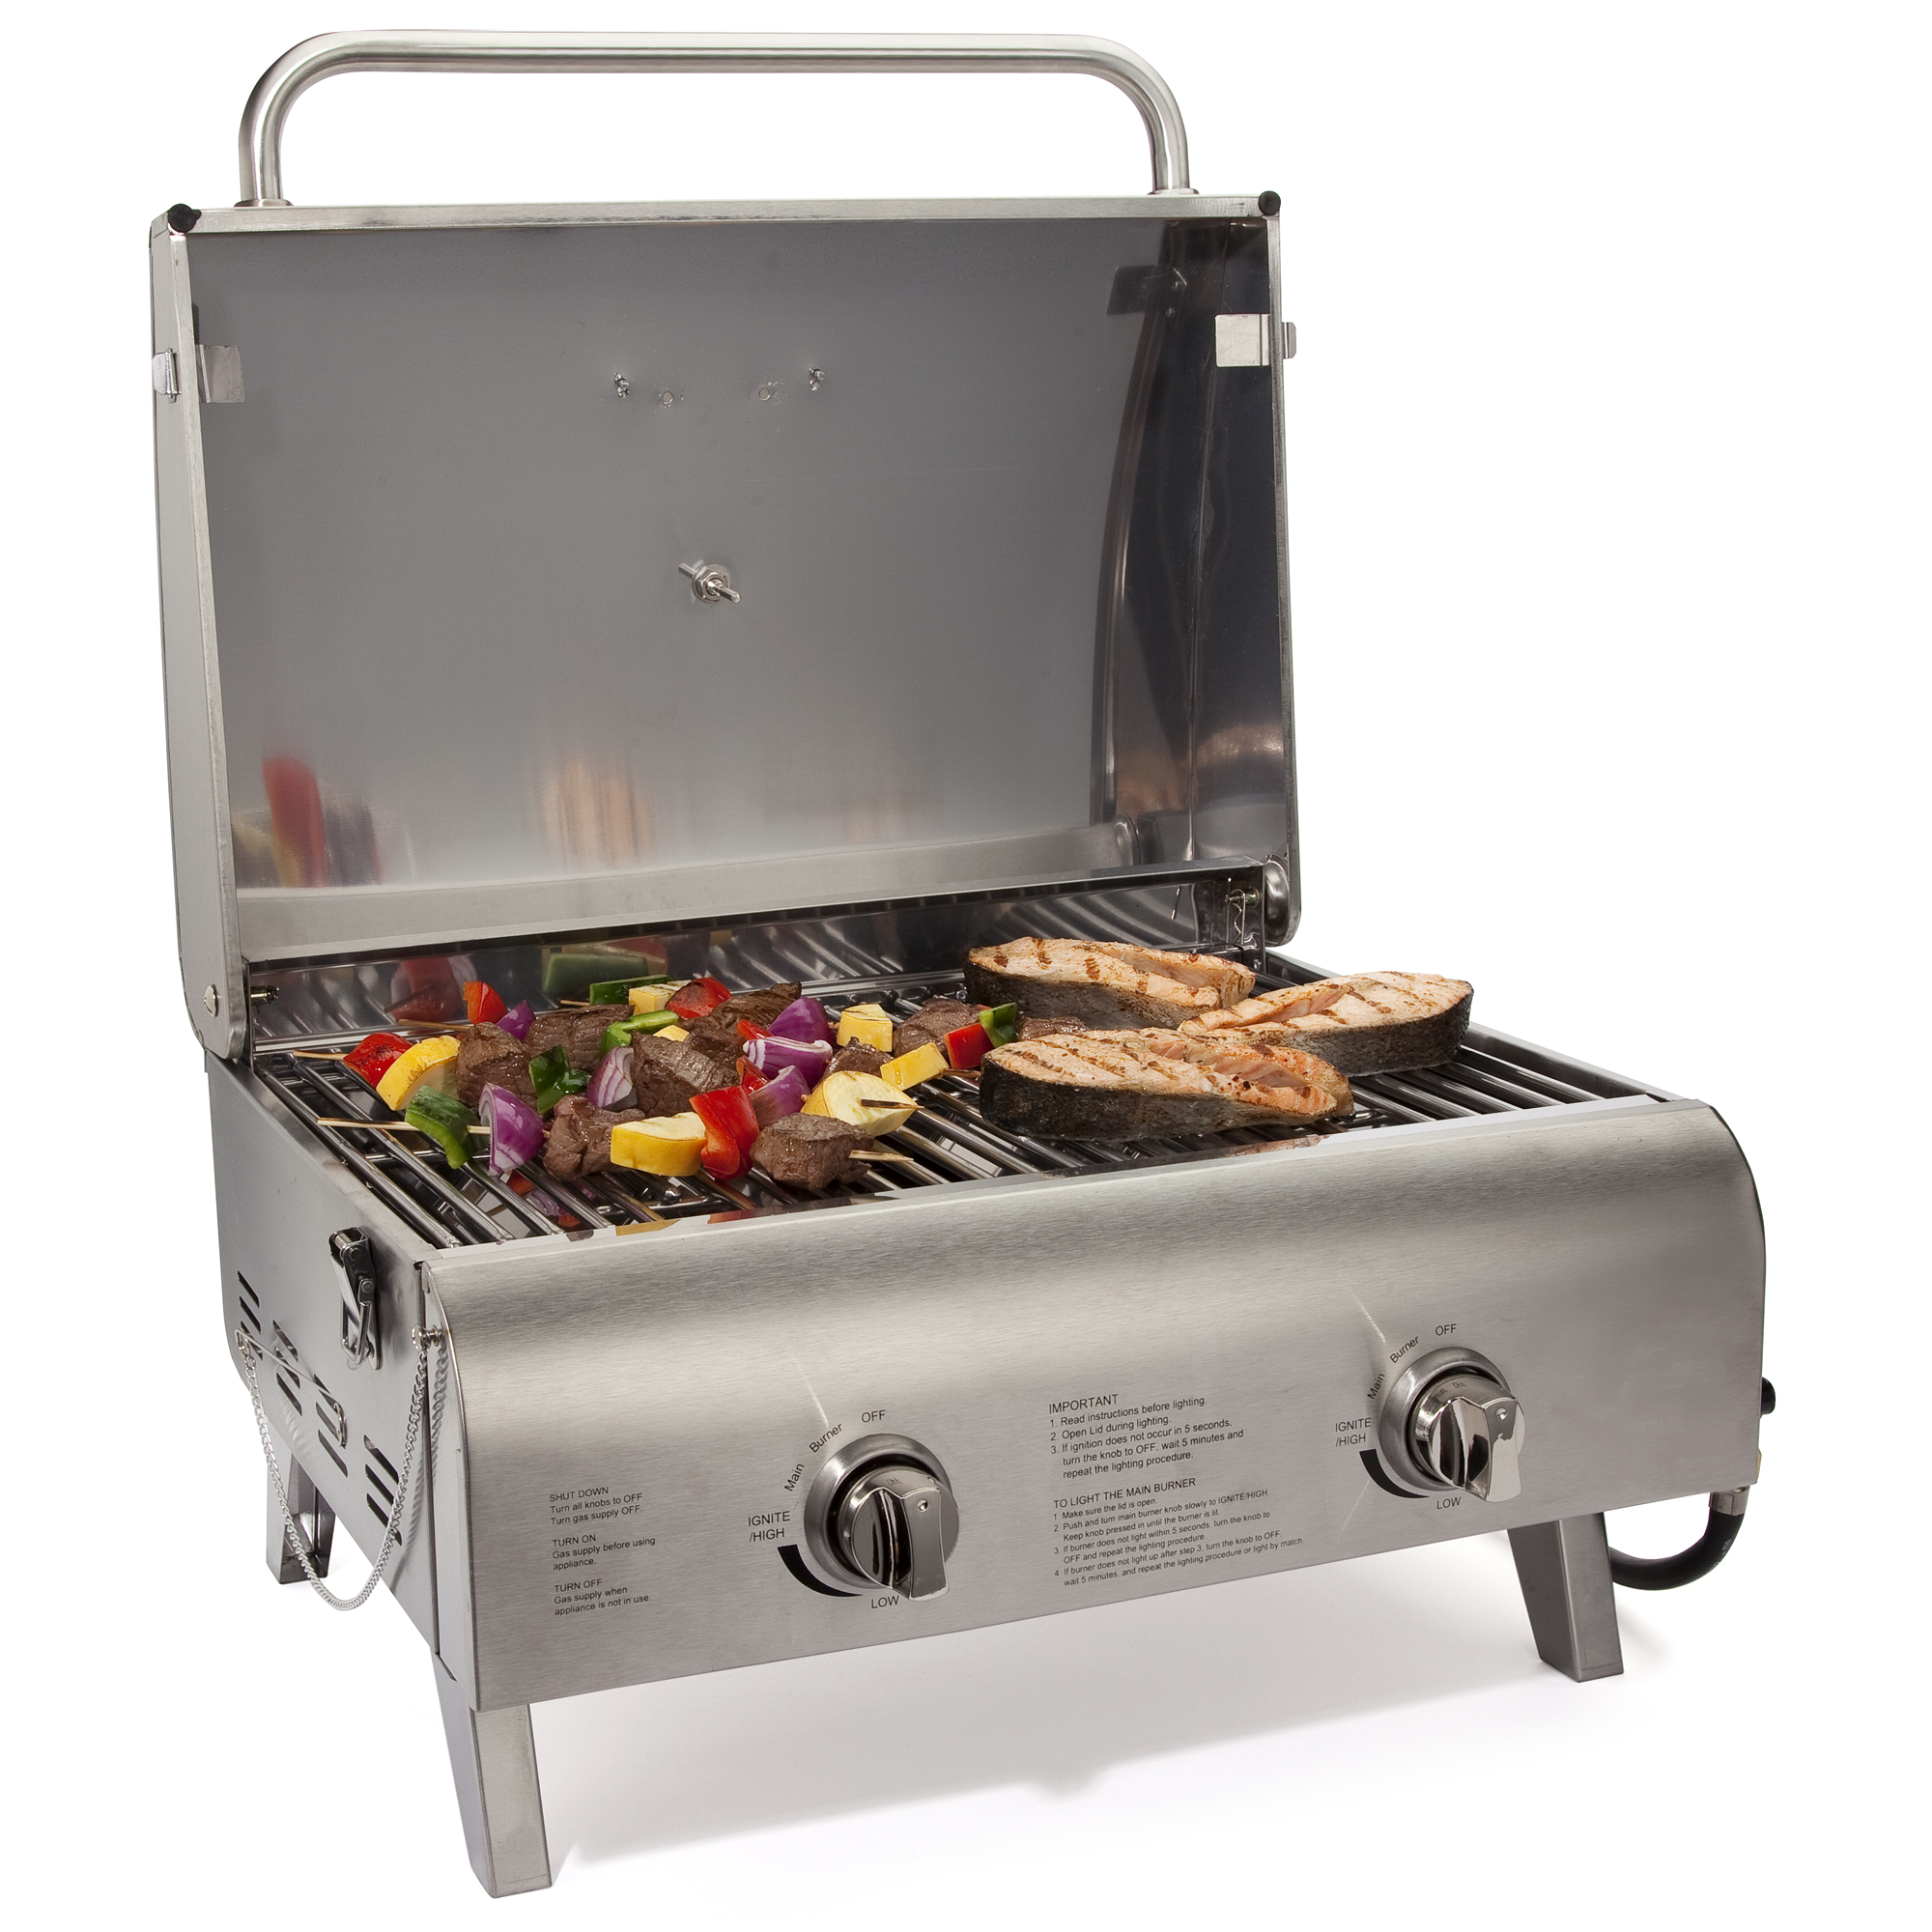 Cuisinart CGG-306 Chef's Style Stainless 2 Burner Tabletop Gas Grill, Silver - image 4 of 17